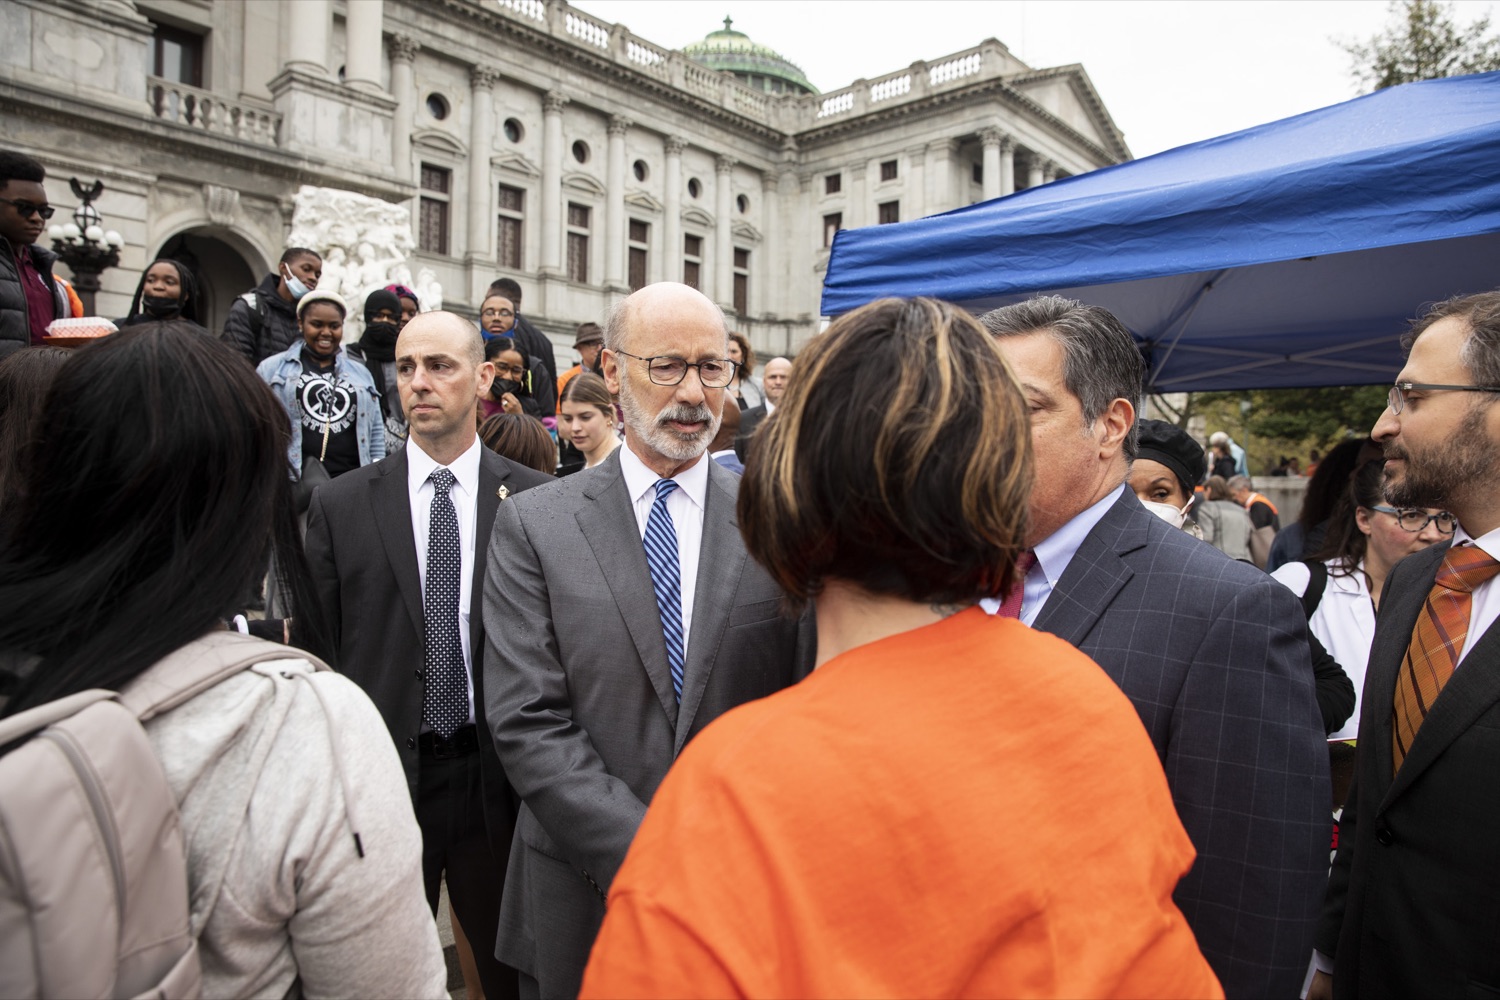 Governor Tom Wolf, joined by CeaseFirePA and more than 200 Pennsylvanians at the Capitol, calls for legislative action to save lives against gun violence, in Harrisburg, PA on April 26, 2022.<br><a href="https://filesource.amperwave.net/commonwealthofpa/photo/20782_gov_ceaseFirePA_09.JPG" target="_blank">⇣ Download Photo</a>